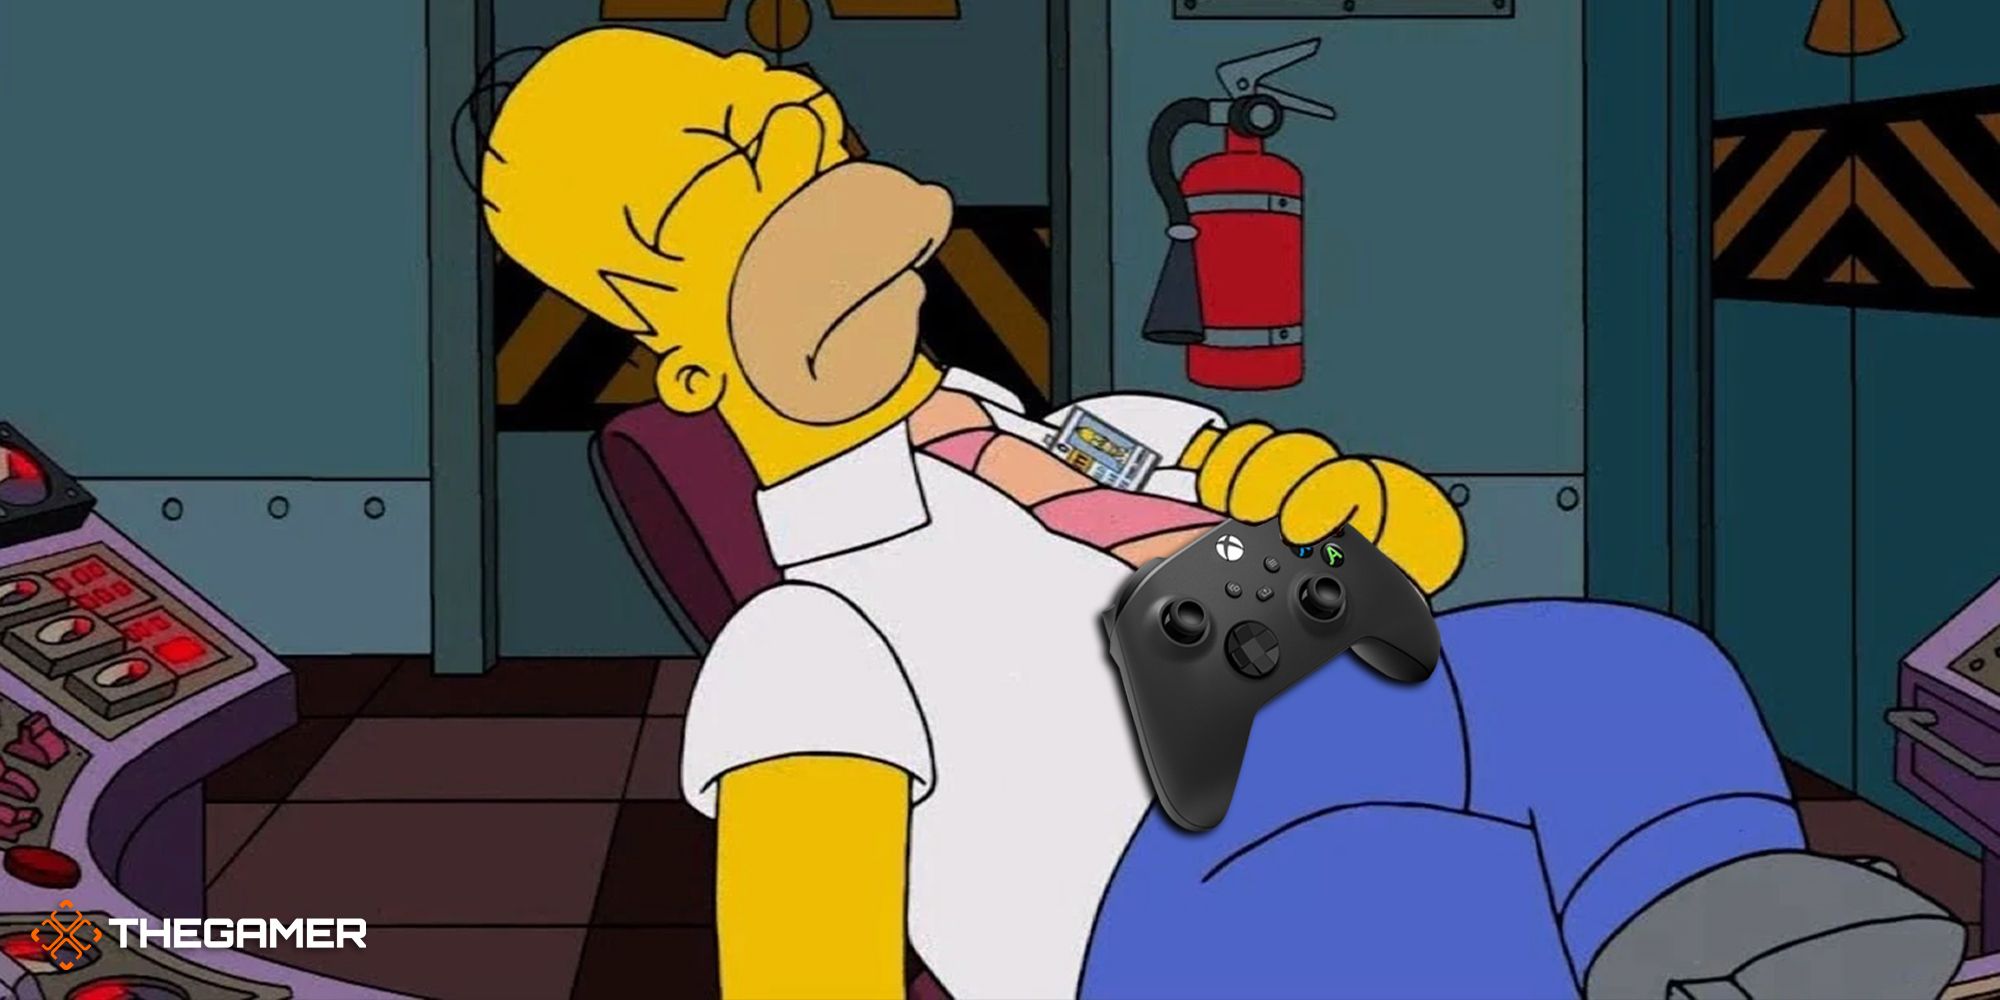 Homer Simpson asleep at a control panel with an Xbox controller in his hand